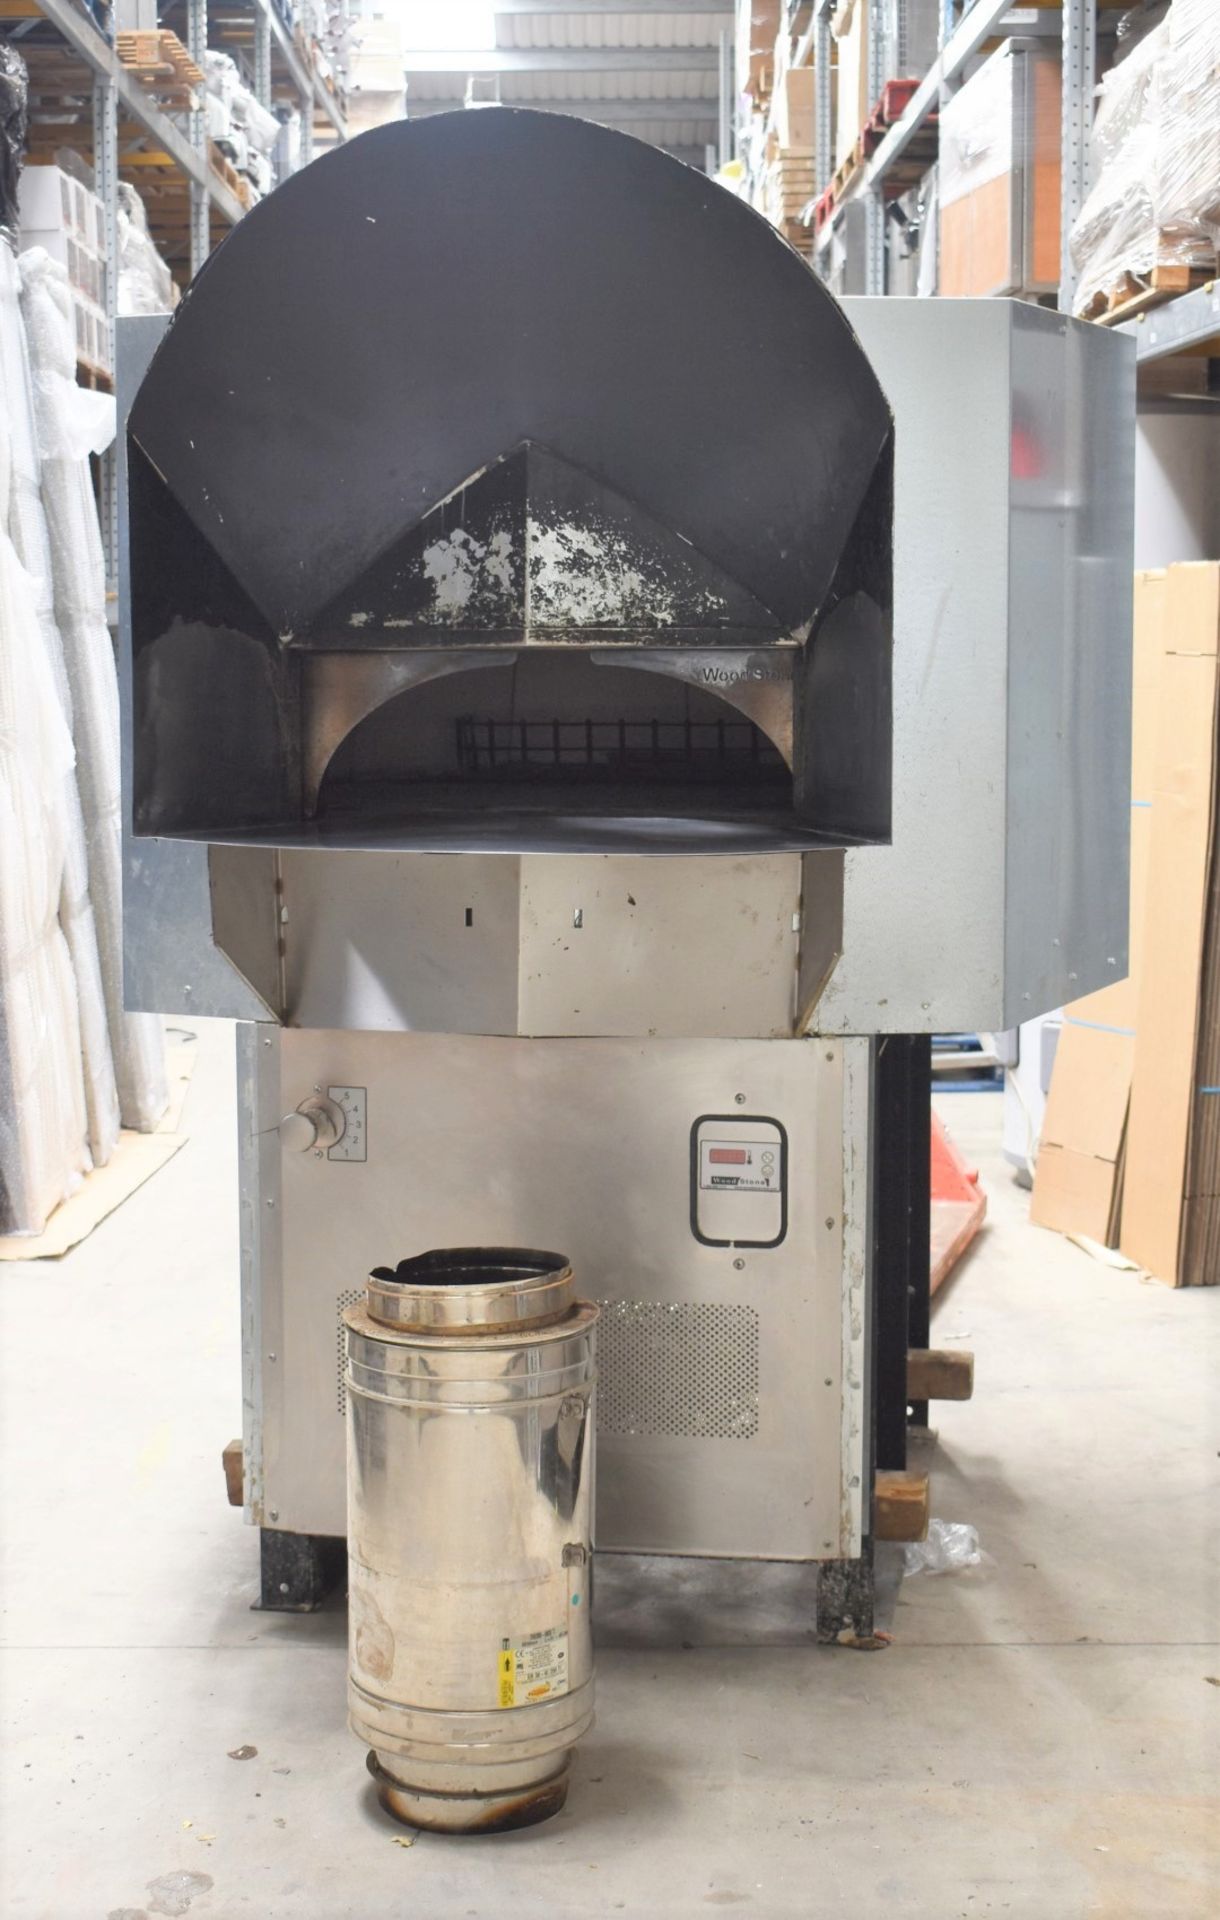 1 x Woodstone Mountain Series Commercial Gas Fired Pizza Oven - Approx RRP £25,000 - Image 7 of 25